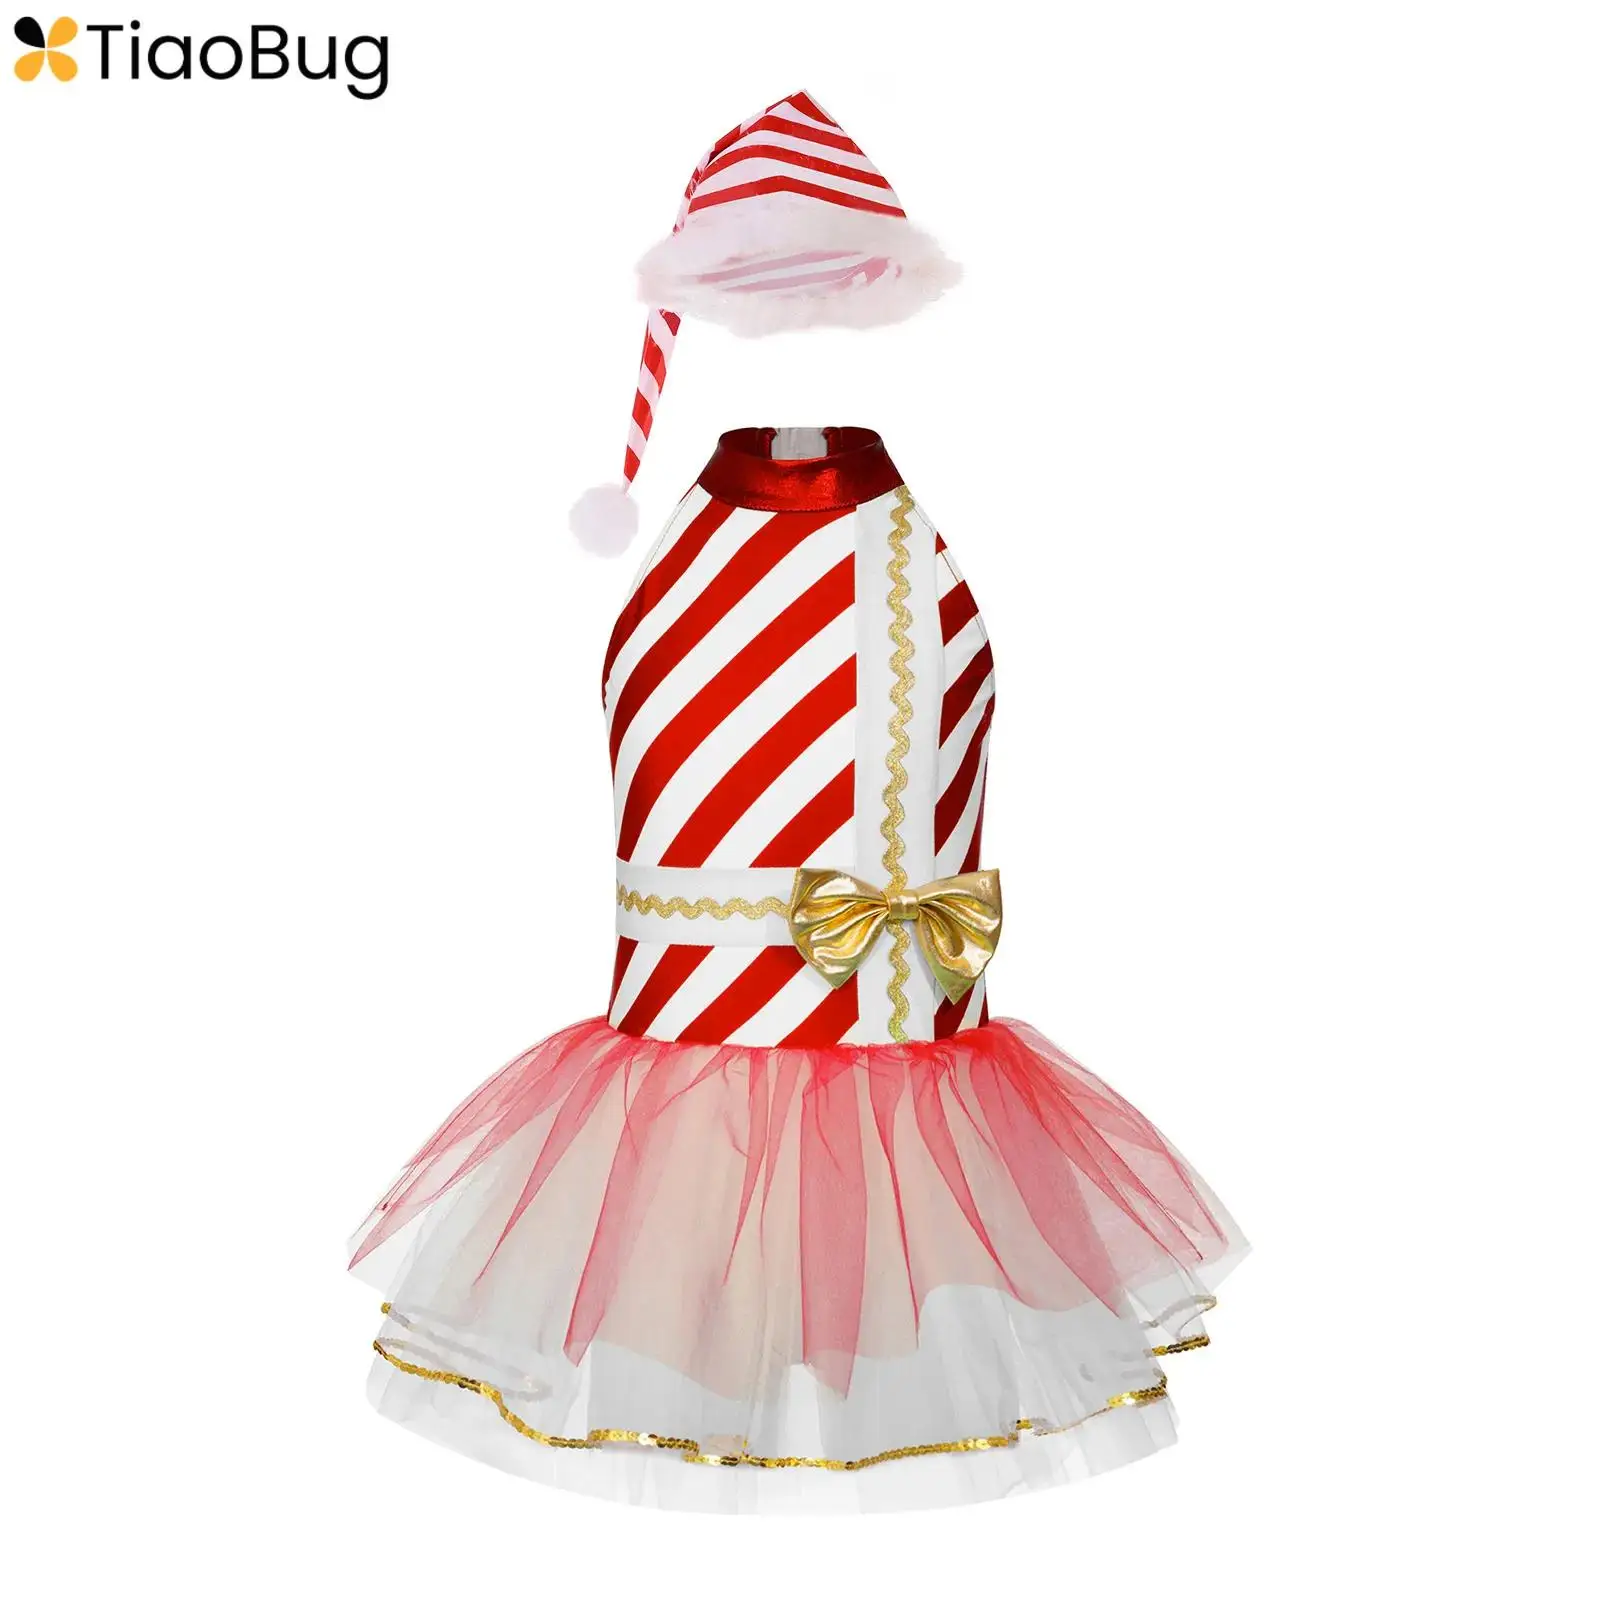 

Kids Girls Christmas Candy Cane Cosplay Costume Ballet Dance Skating Tulle Tutu Dress with Hat Xmas Party Santa Claus Outfits